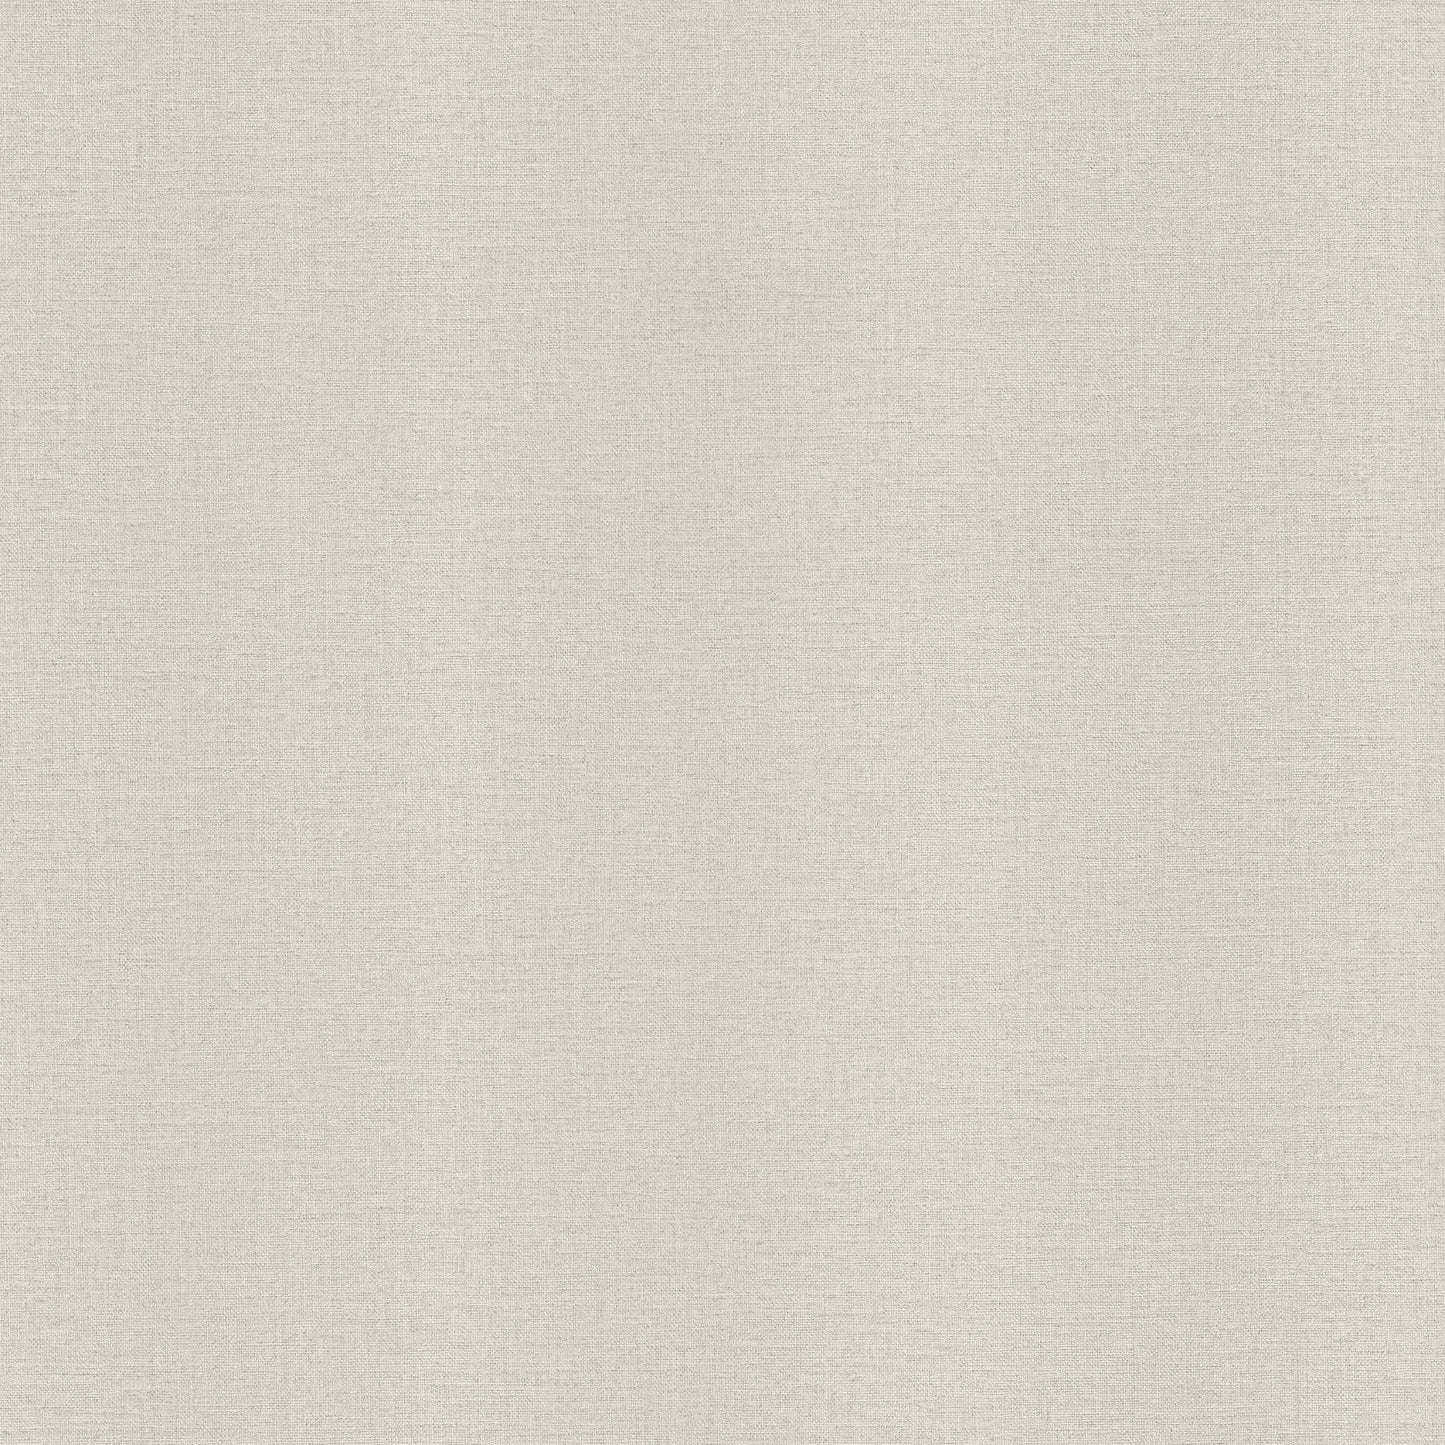 Save 2773-448610 Neutral Black White Greys Fabric Textures Wallpaper by Advantage